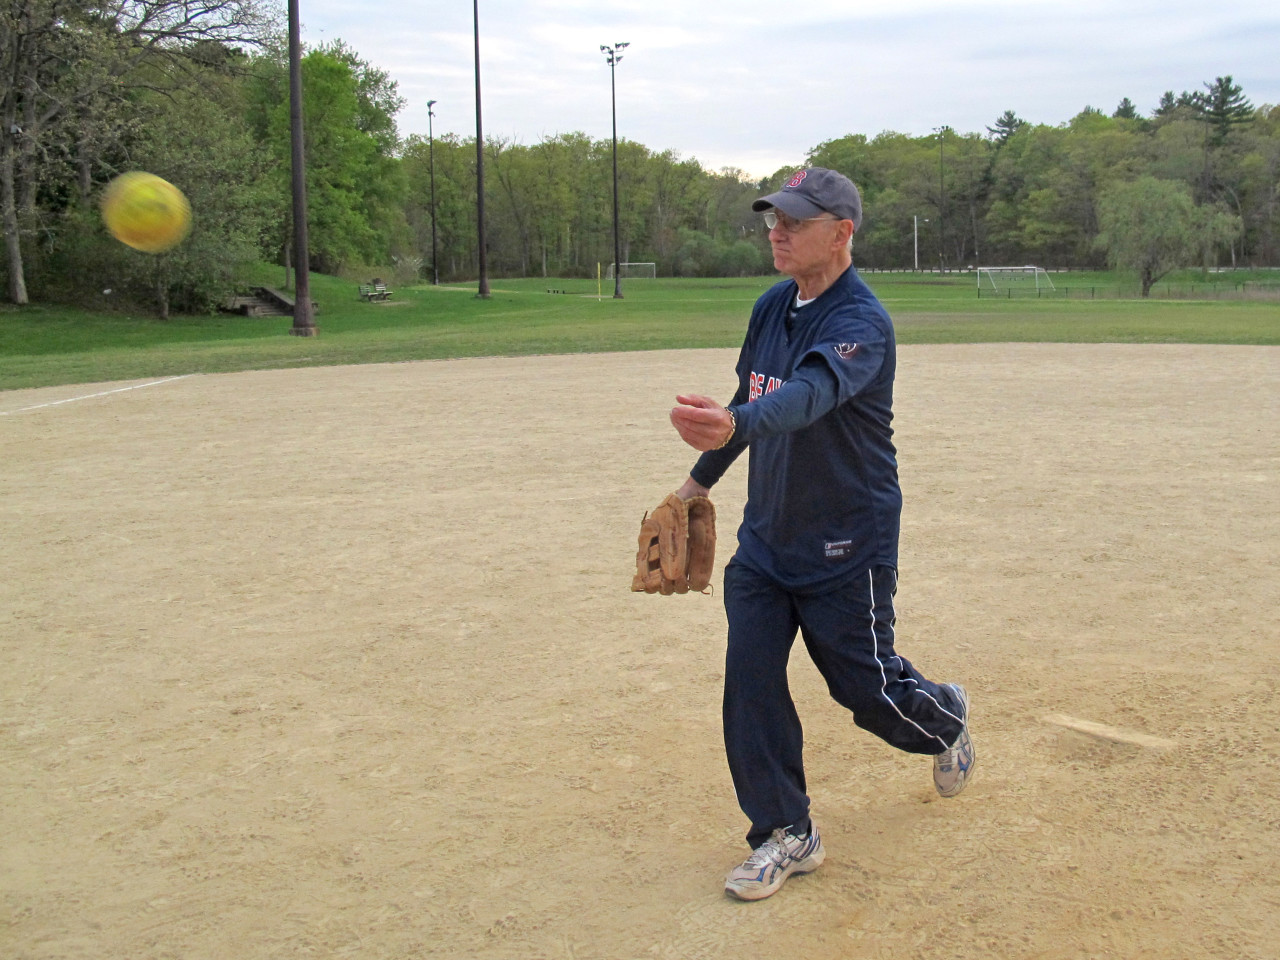 Mo Englander tosses a warmup pitch. (Bill Littlefield/Only A Game)